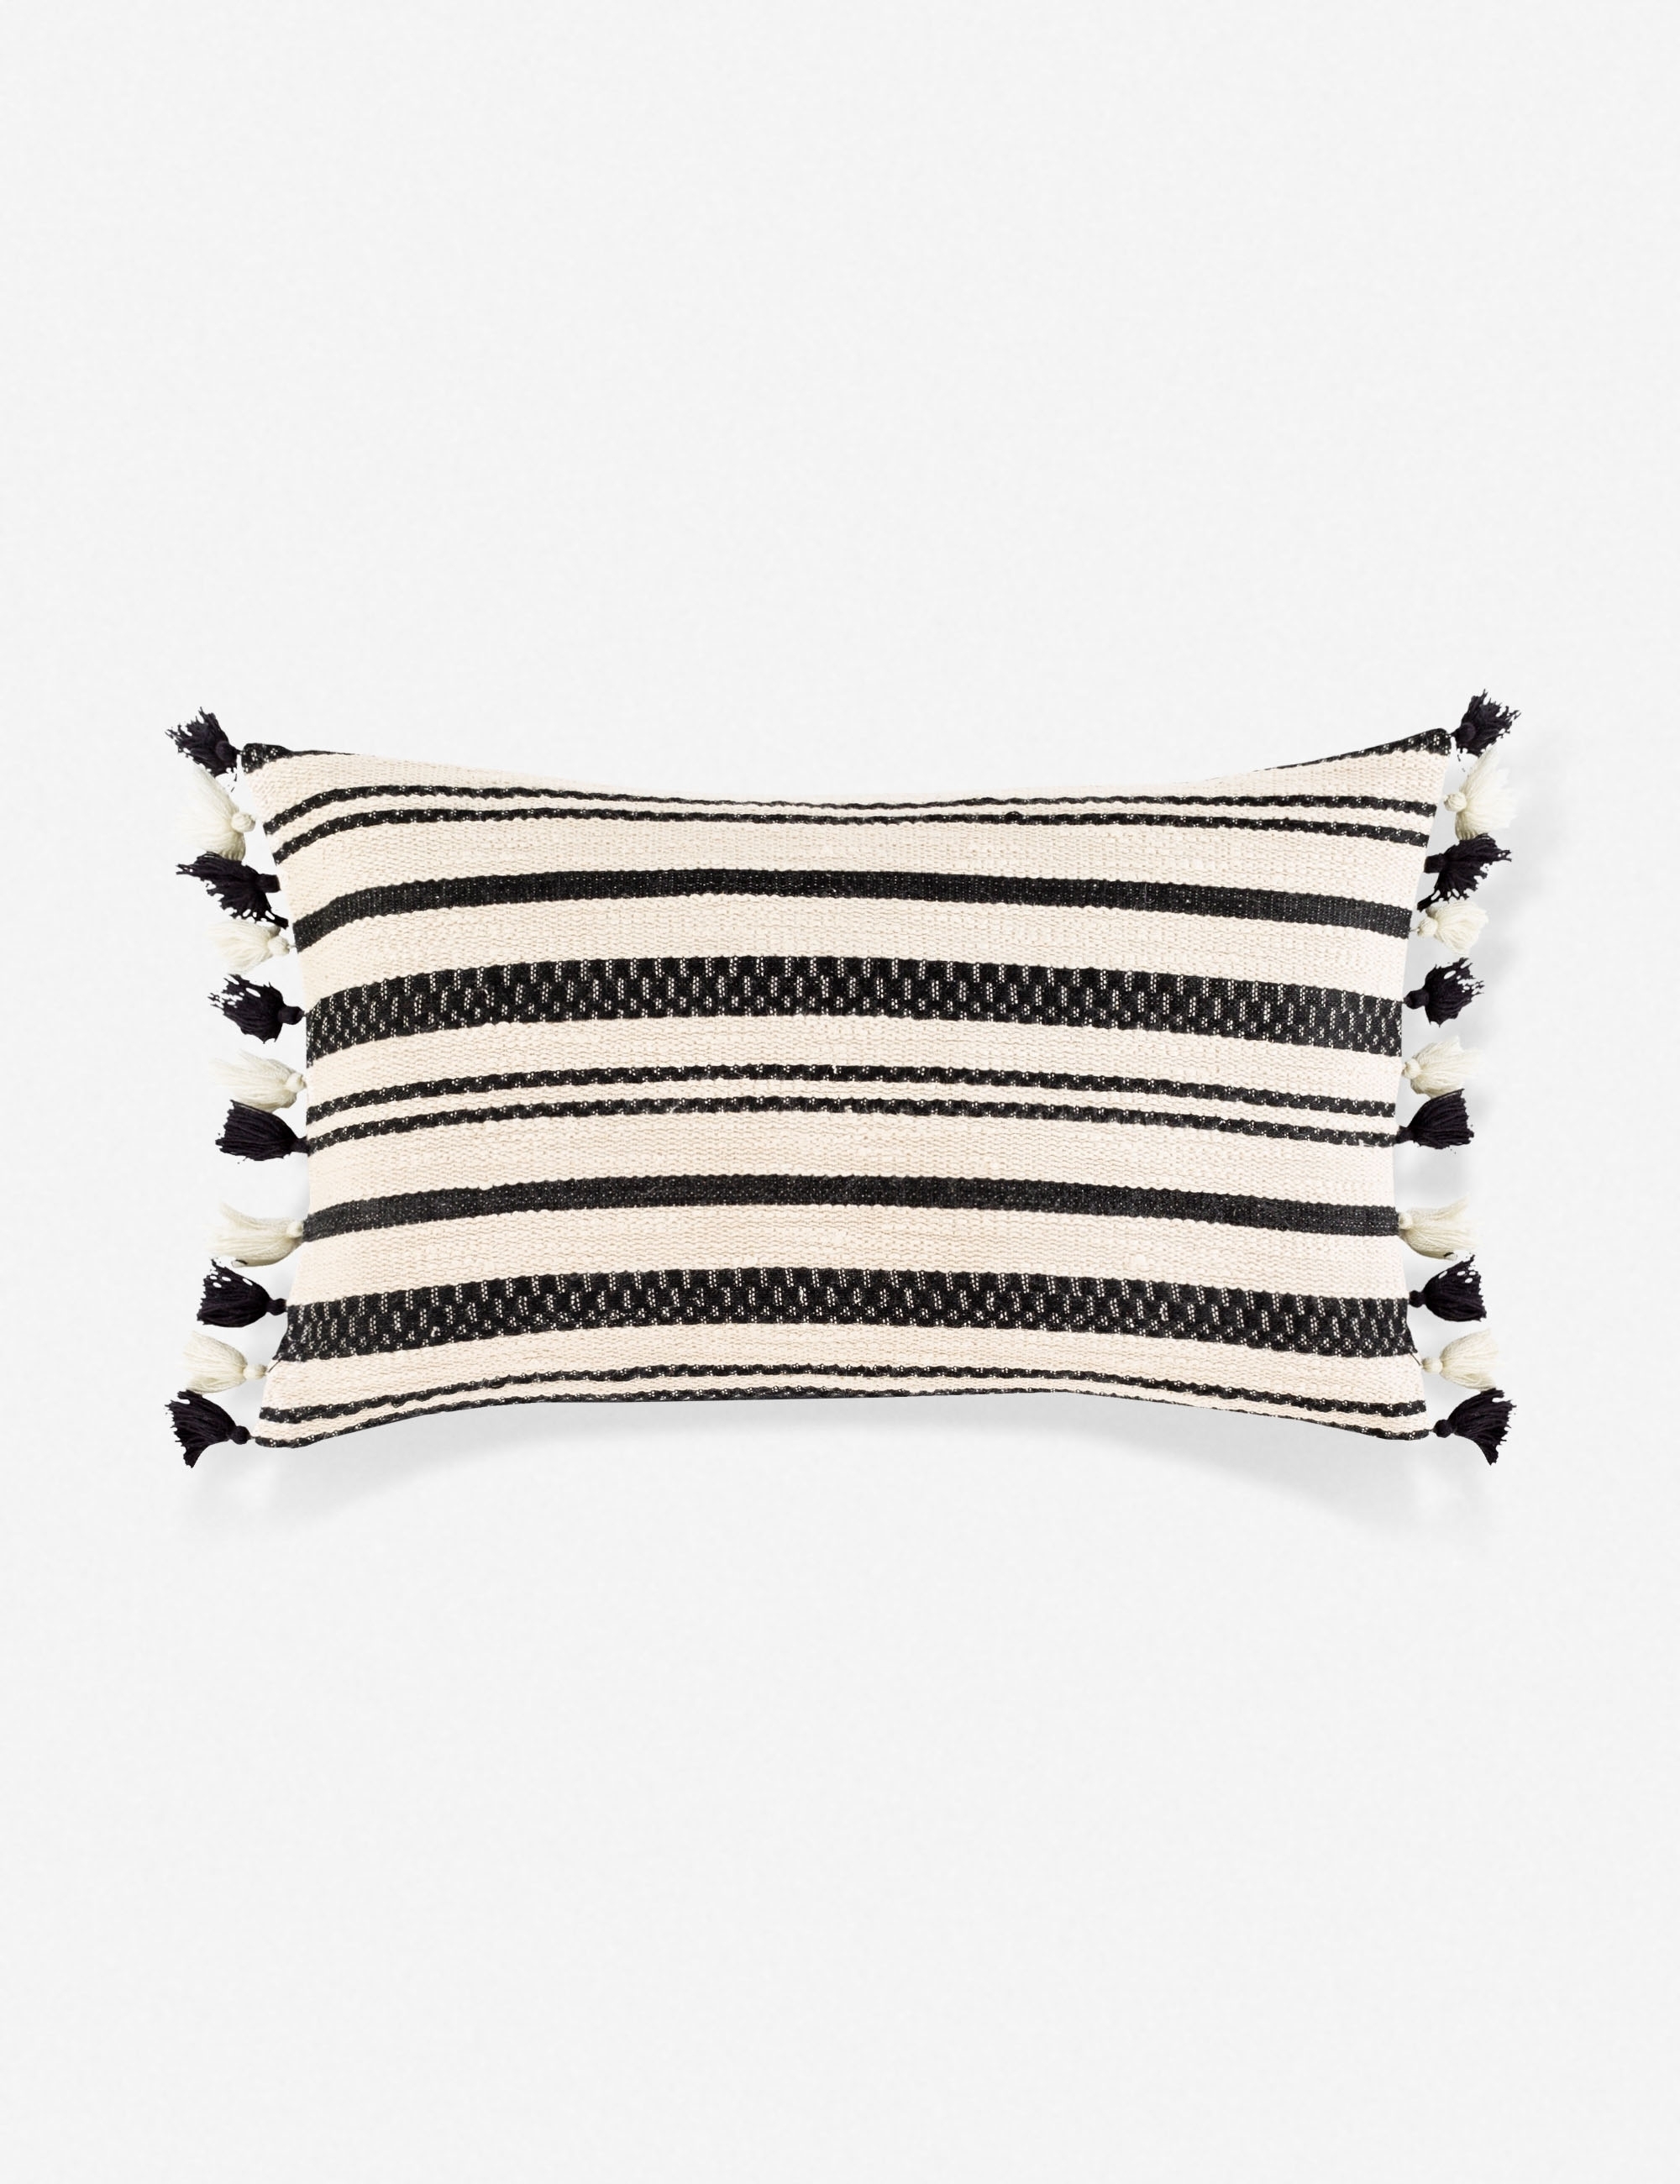 (DISCONTINUED) Margaux Lumbar Pillow, Cream and Black - Image 0